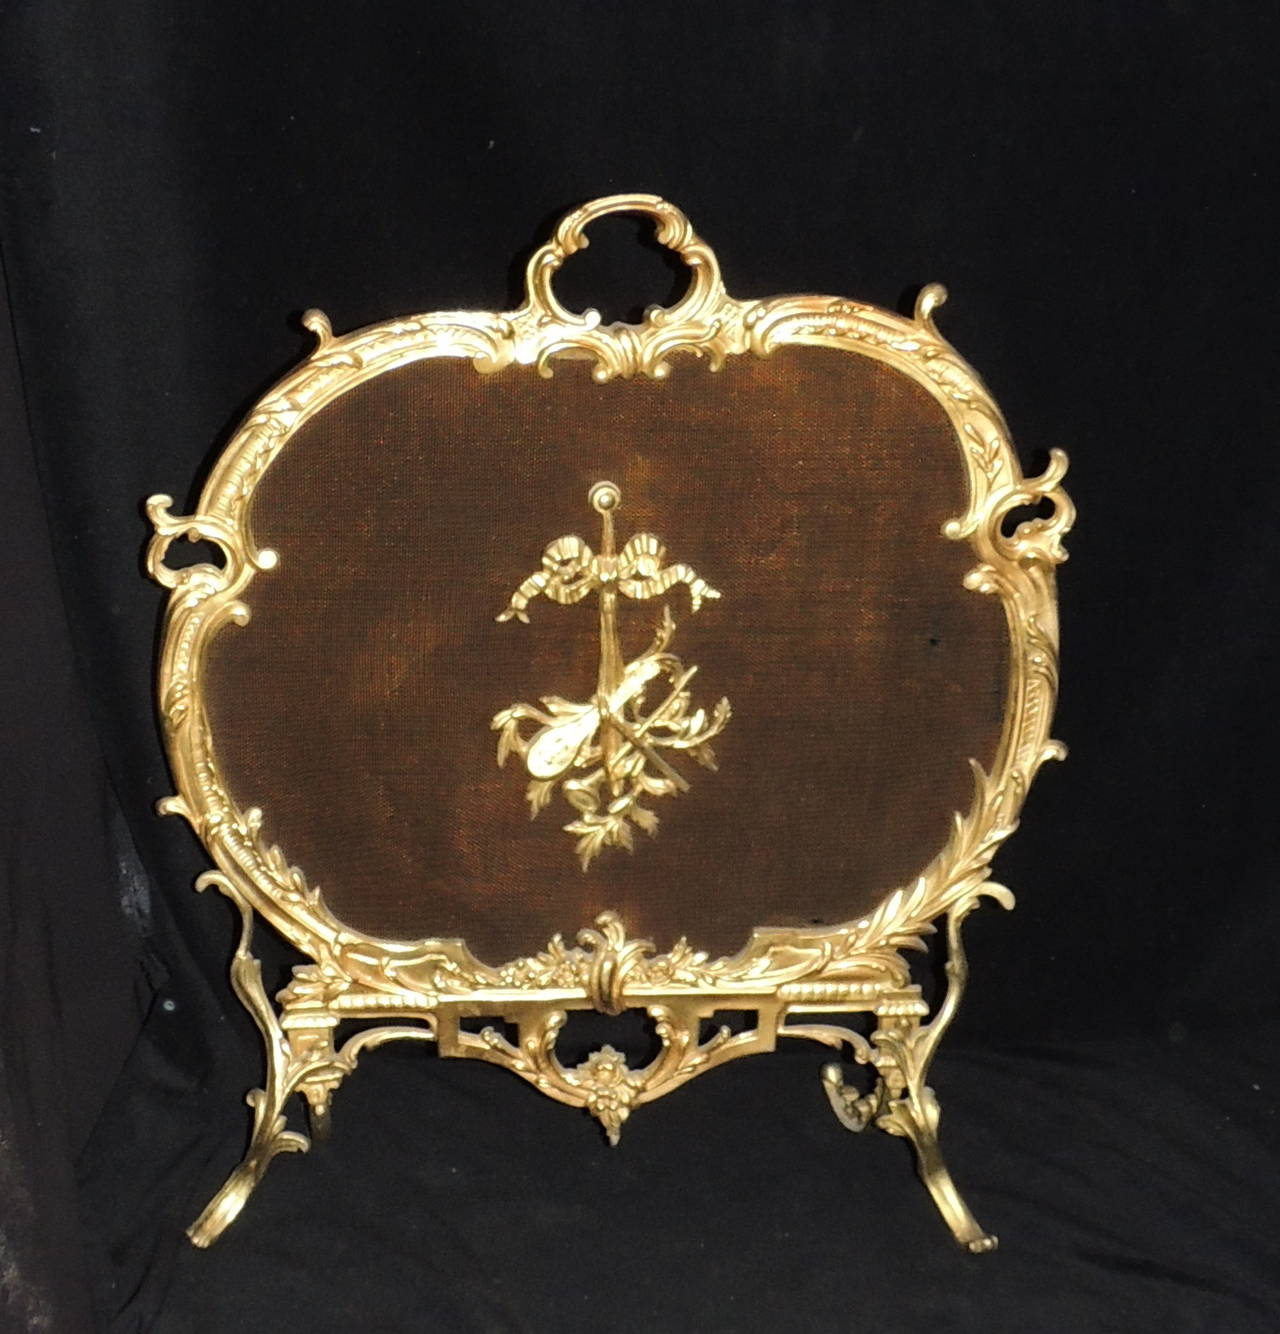 Elegantly detailed Rococo French doré bronze fires place screen is ornately decorated starting with the centre medallion which is a lute with musical horns tied with beautiful ribbon detail. The handle and surrounding bronze work is beautiful relief